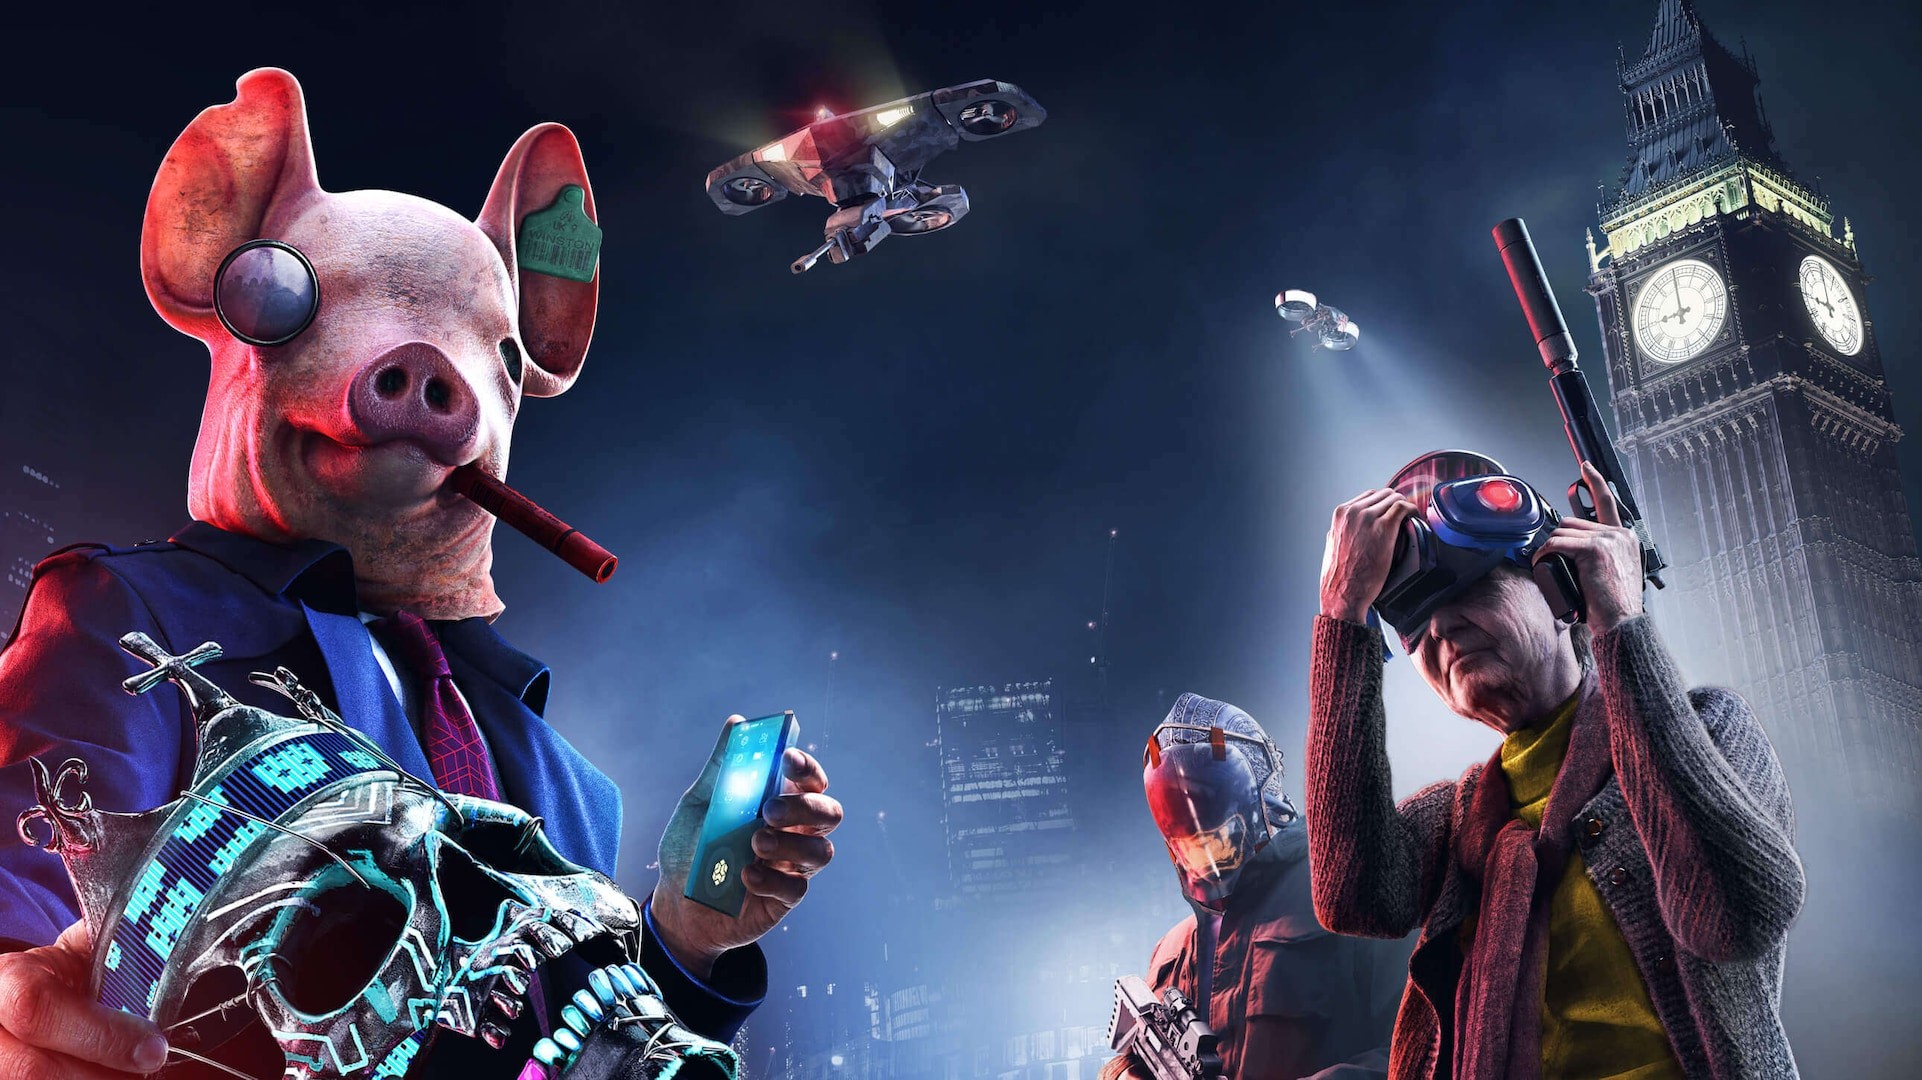 Cool Watch Dogs Legion Wallpapers